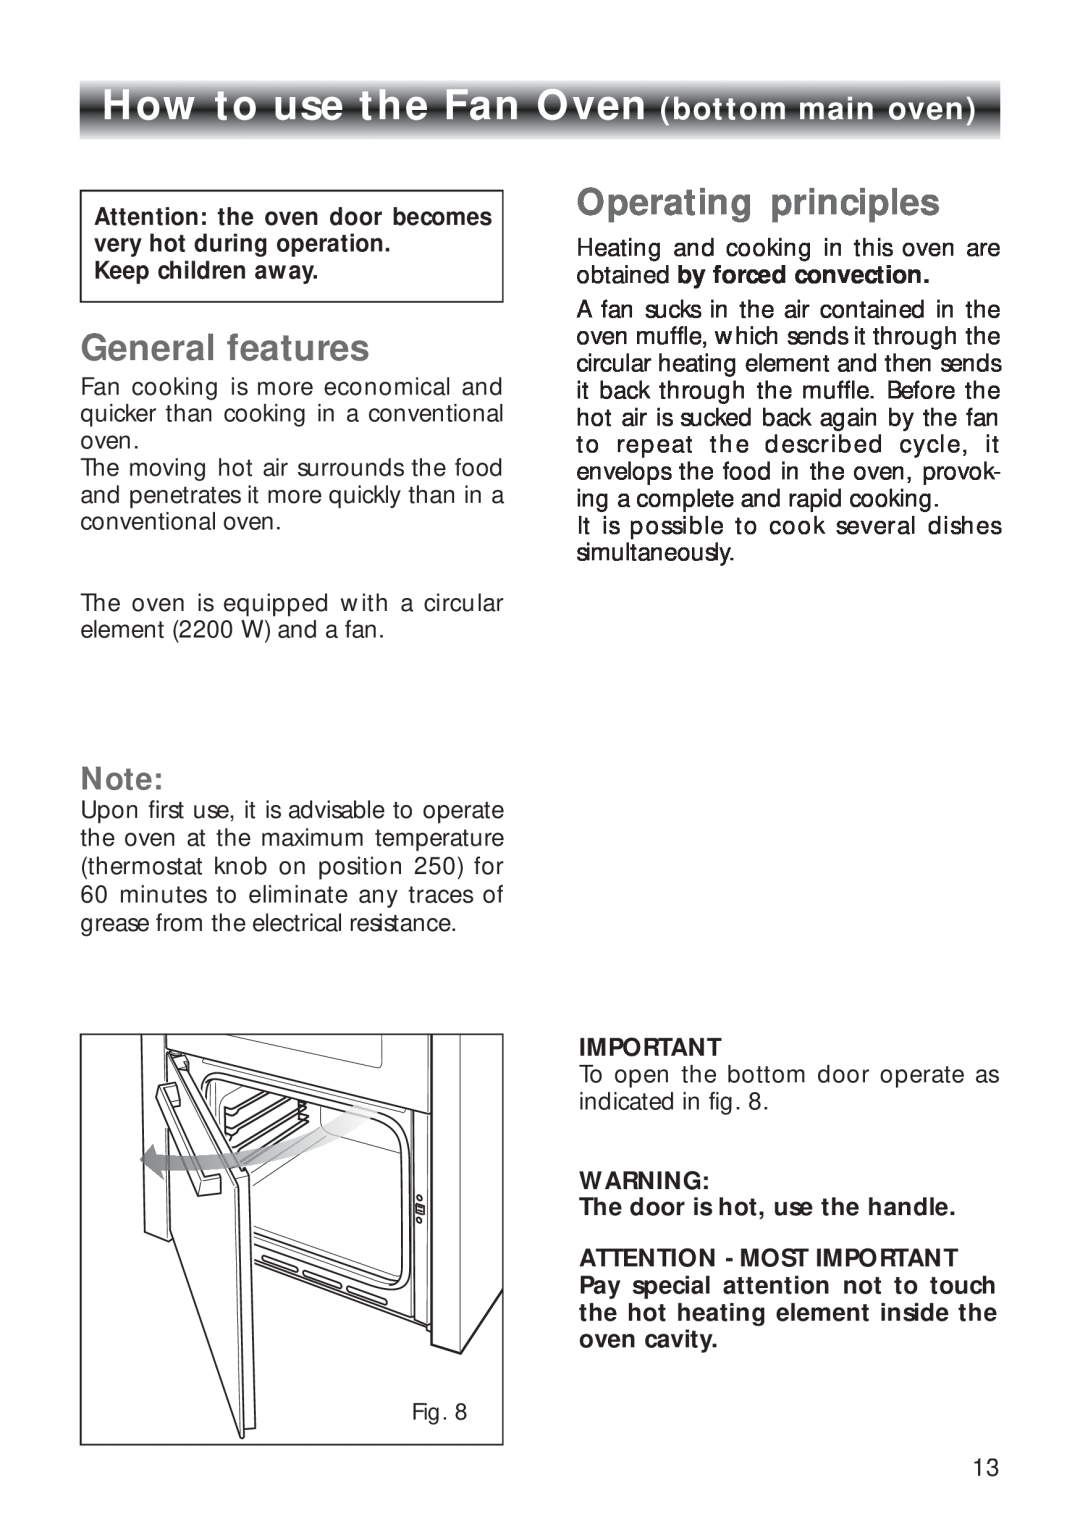 CDA RV 700 installation instructions How to use the Fan Oven bottom main oven, General features, Operating principles 